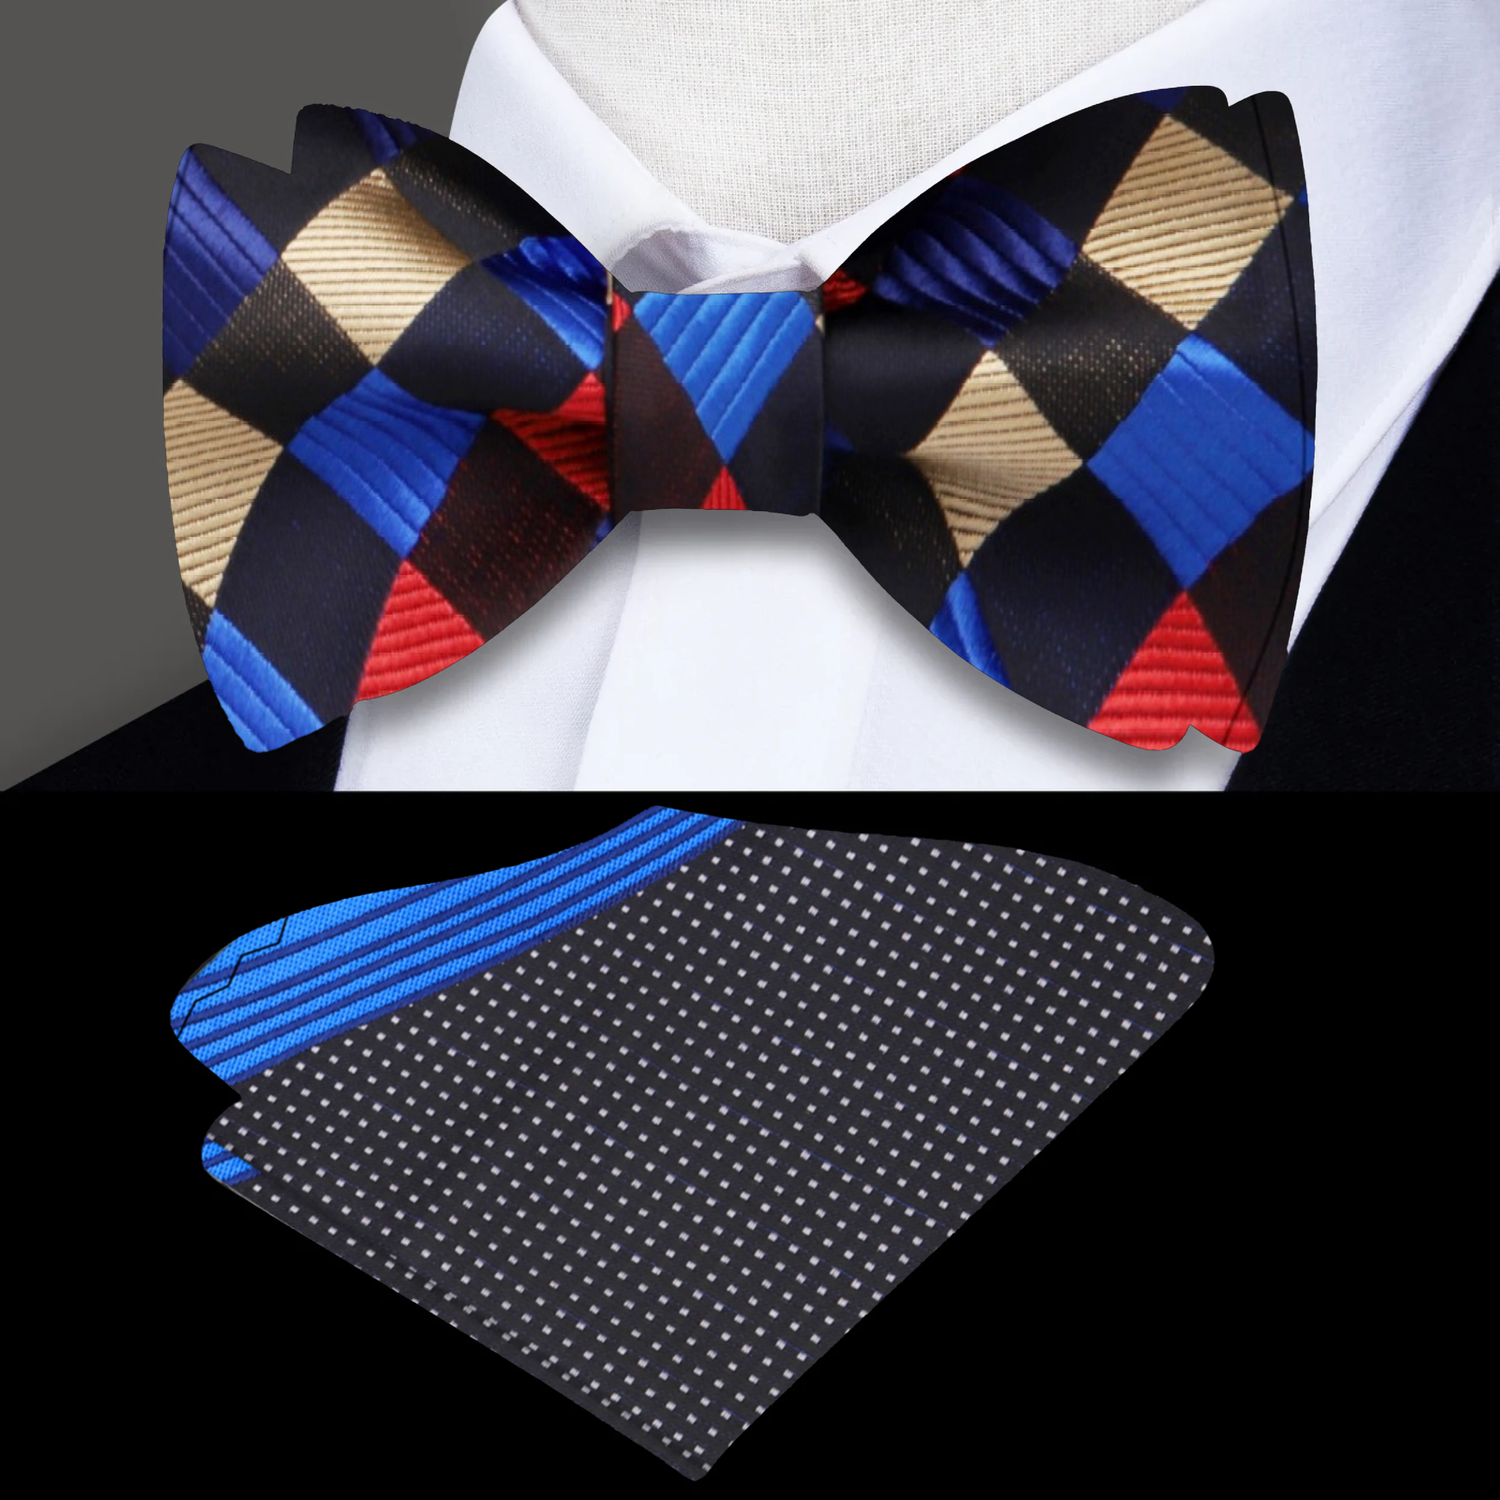 Black, Blue, Yellow and Red Geometric Bow Tie and Accenting Pocket Square